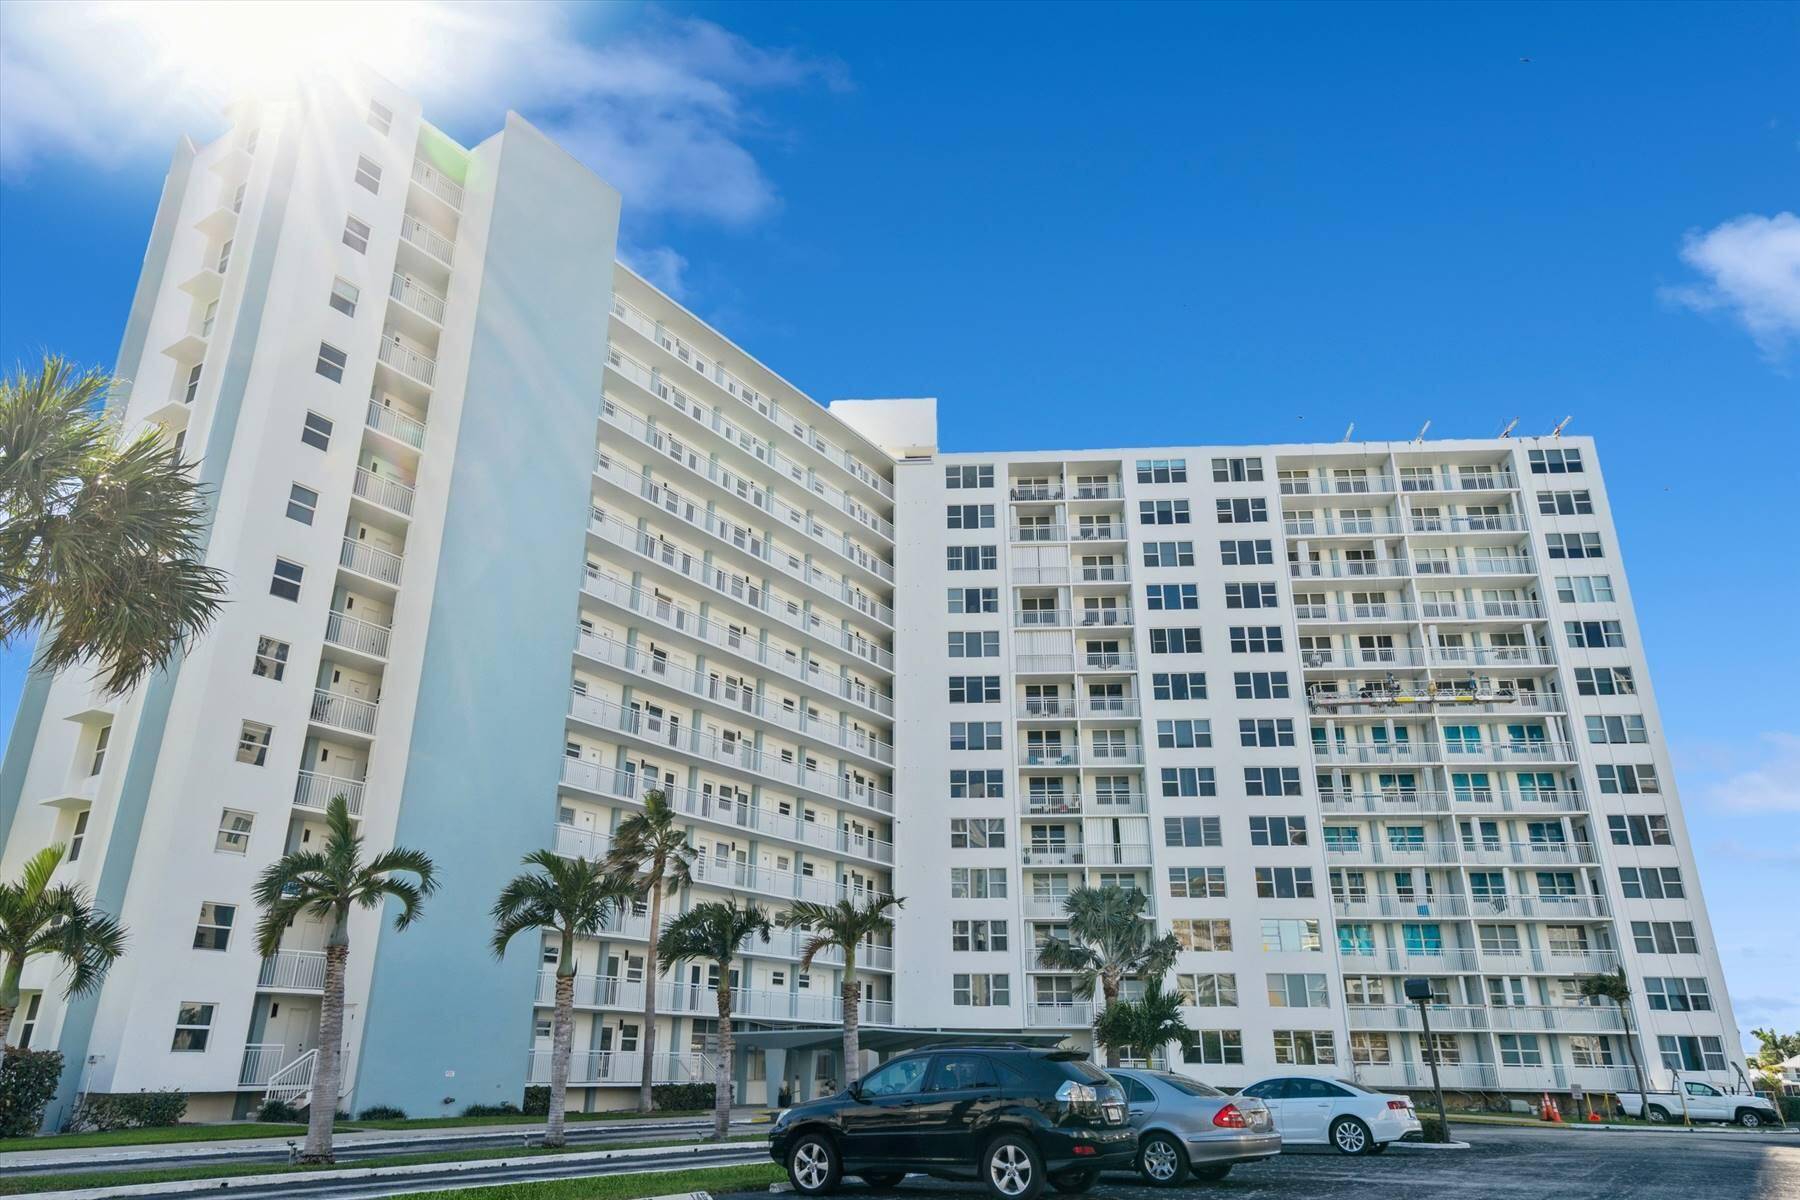 Escape to your beachside sanctuary in this 1BR 1BA haven across Pompano Beach.